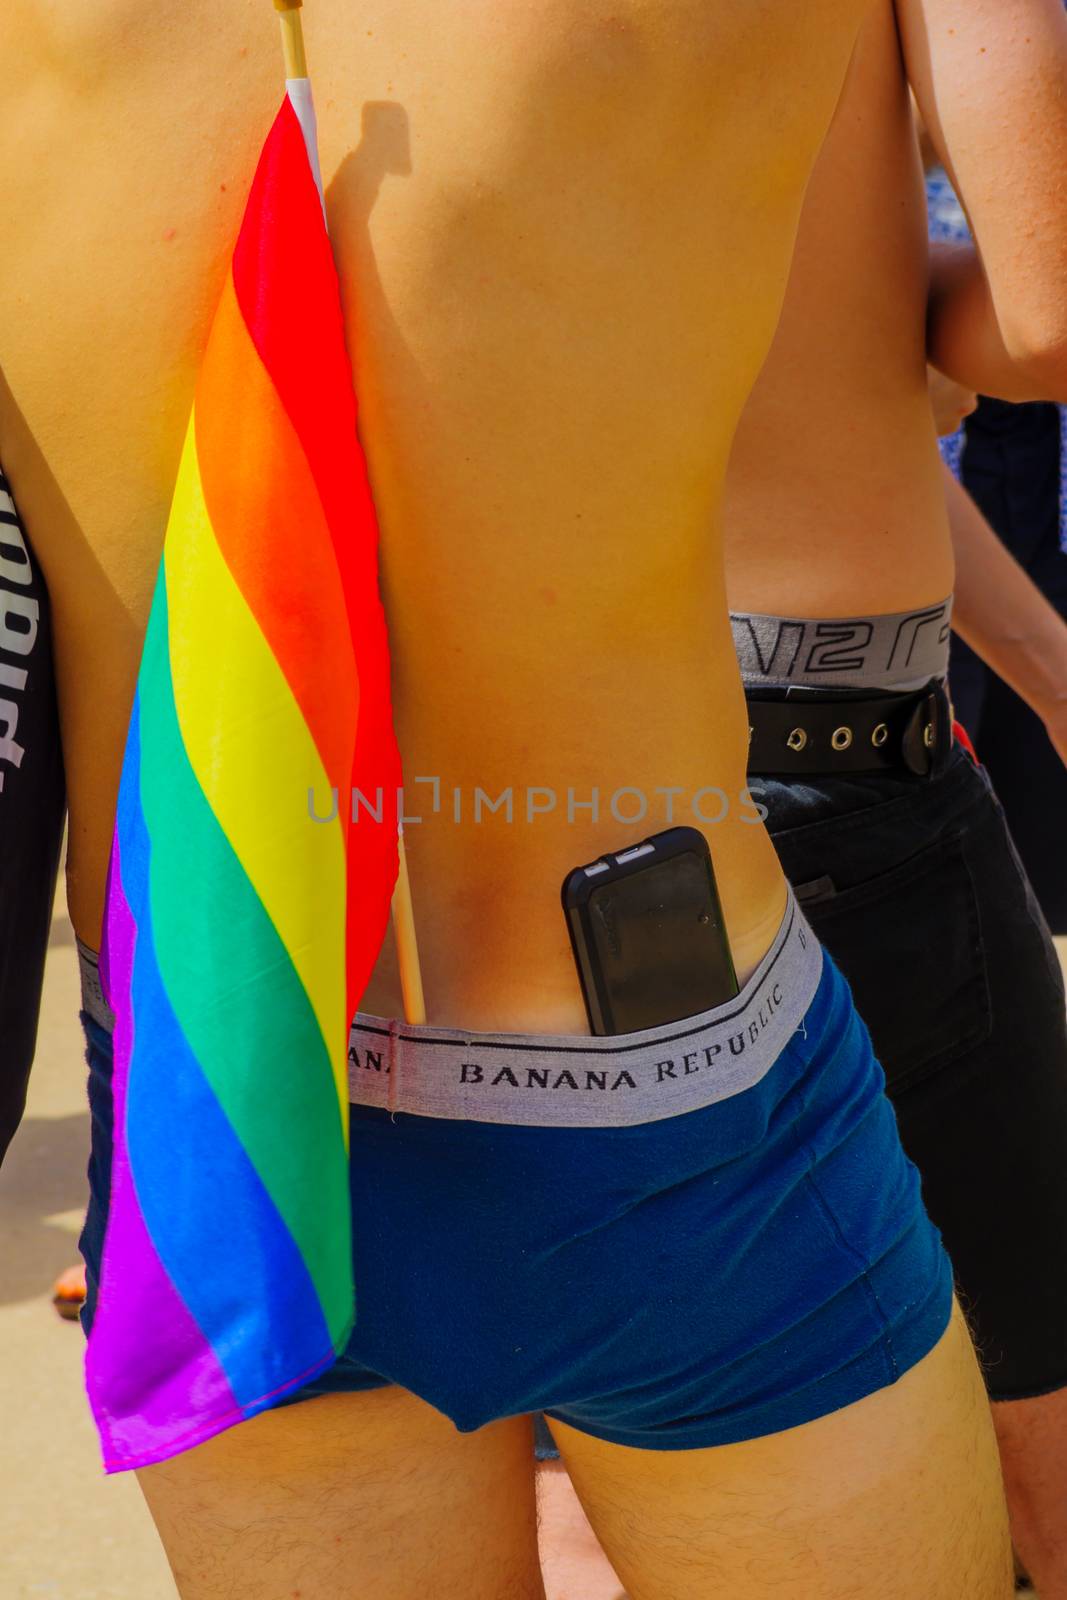 TEL-AVIV, ISRAEL - JUNE 03, 2016: Participant in the Pride Parade holds pride flag and phone, in Tel-Aviv, Israel. Its part of an annual event of the LGBT community